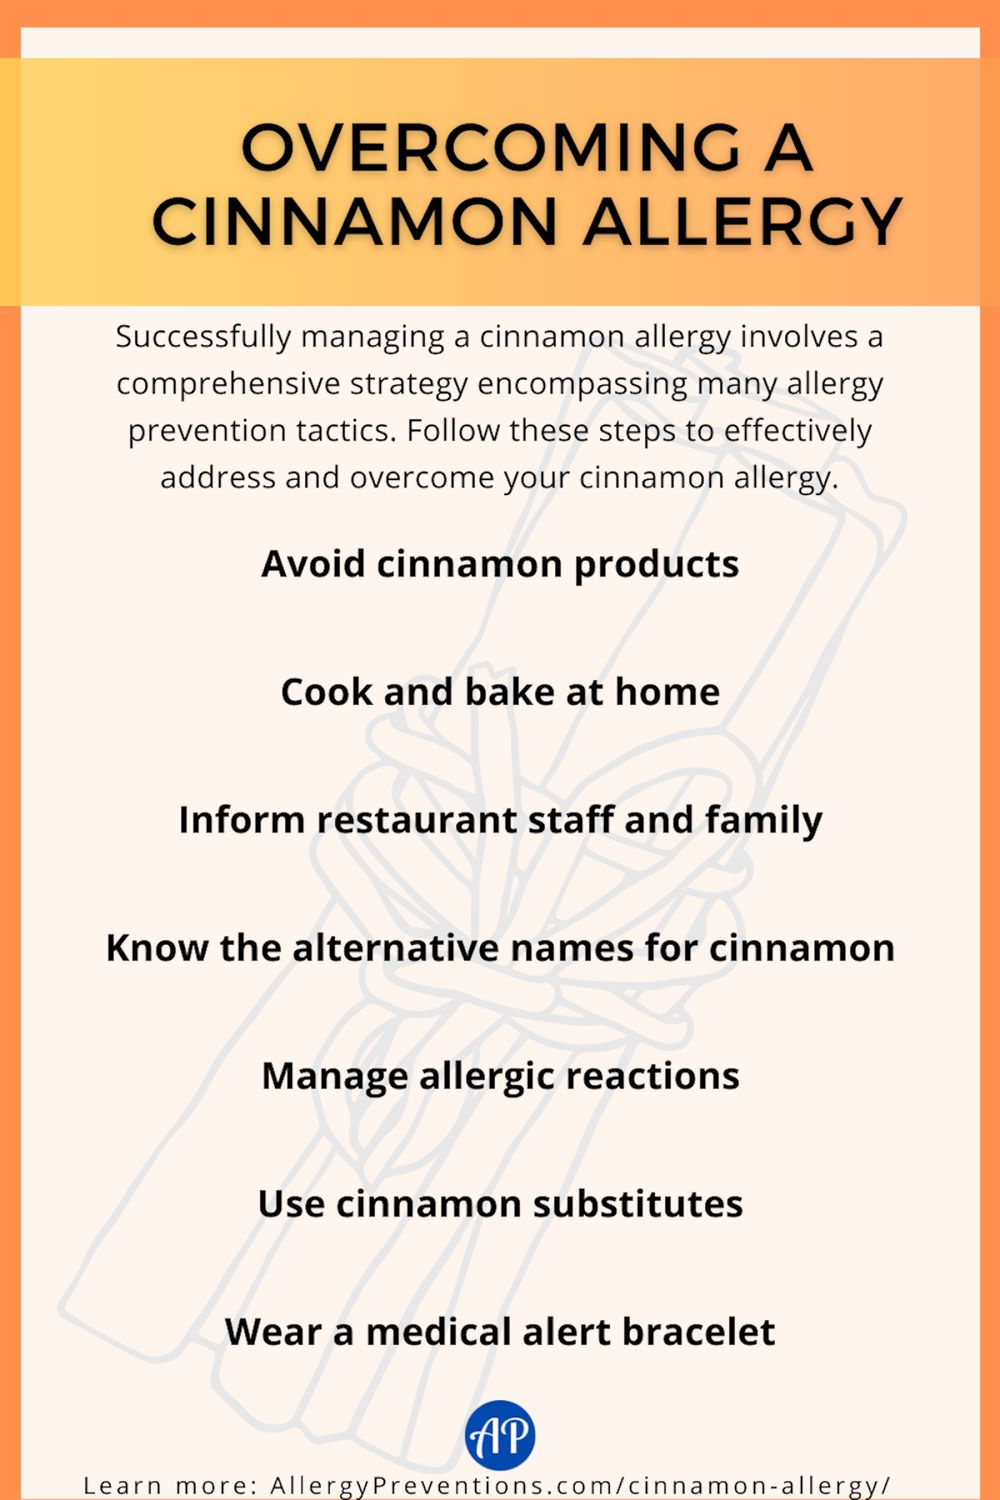 Overcoming a cinnamon allergy infographic. Successfully managing a cinnamon allergy involves a comprehensive strategy encompassing many allergy prevention tactics. Follow these steps to effectively address and overcome your cinnamon allergy: Avoid cinnamon products, Cook and bake at home, Inform restaurant staff and family, Know the alternative names for cinnamon, Manage allergic reactions, Use cinnamon substitutes, Wear a medical alert bracelet.